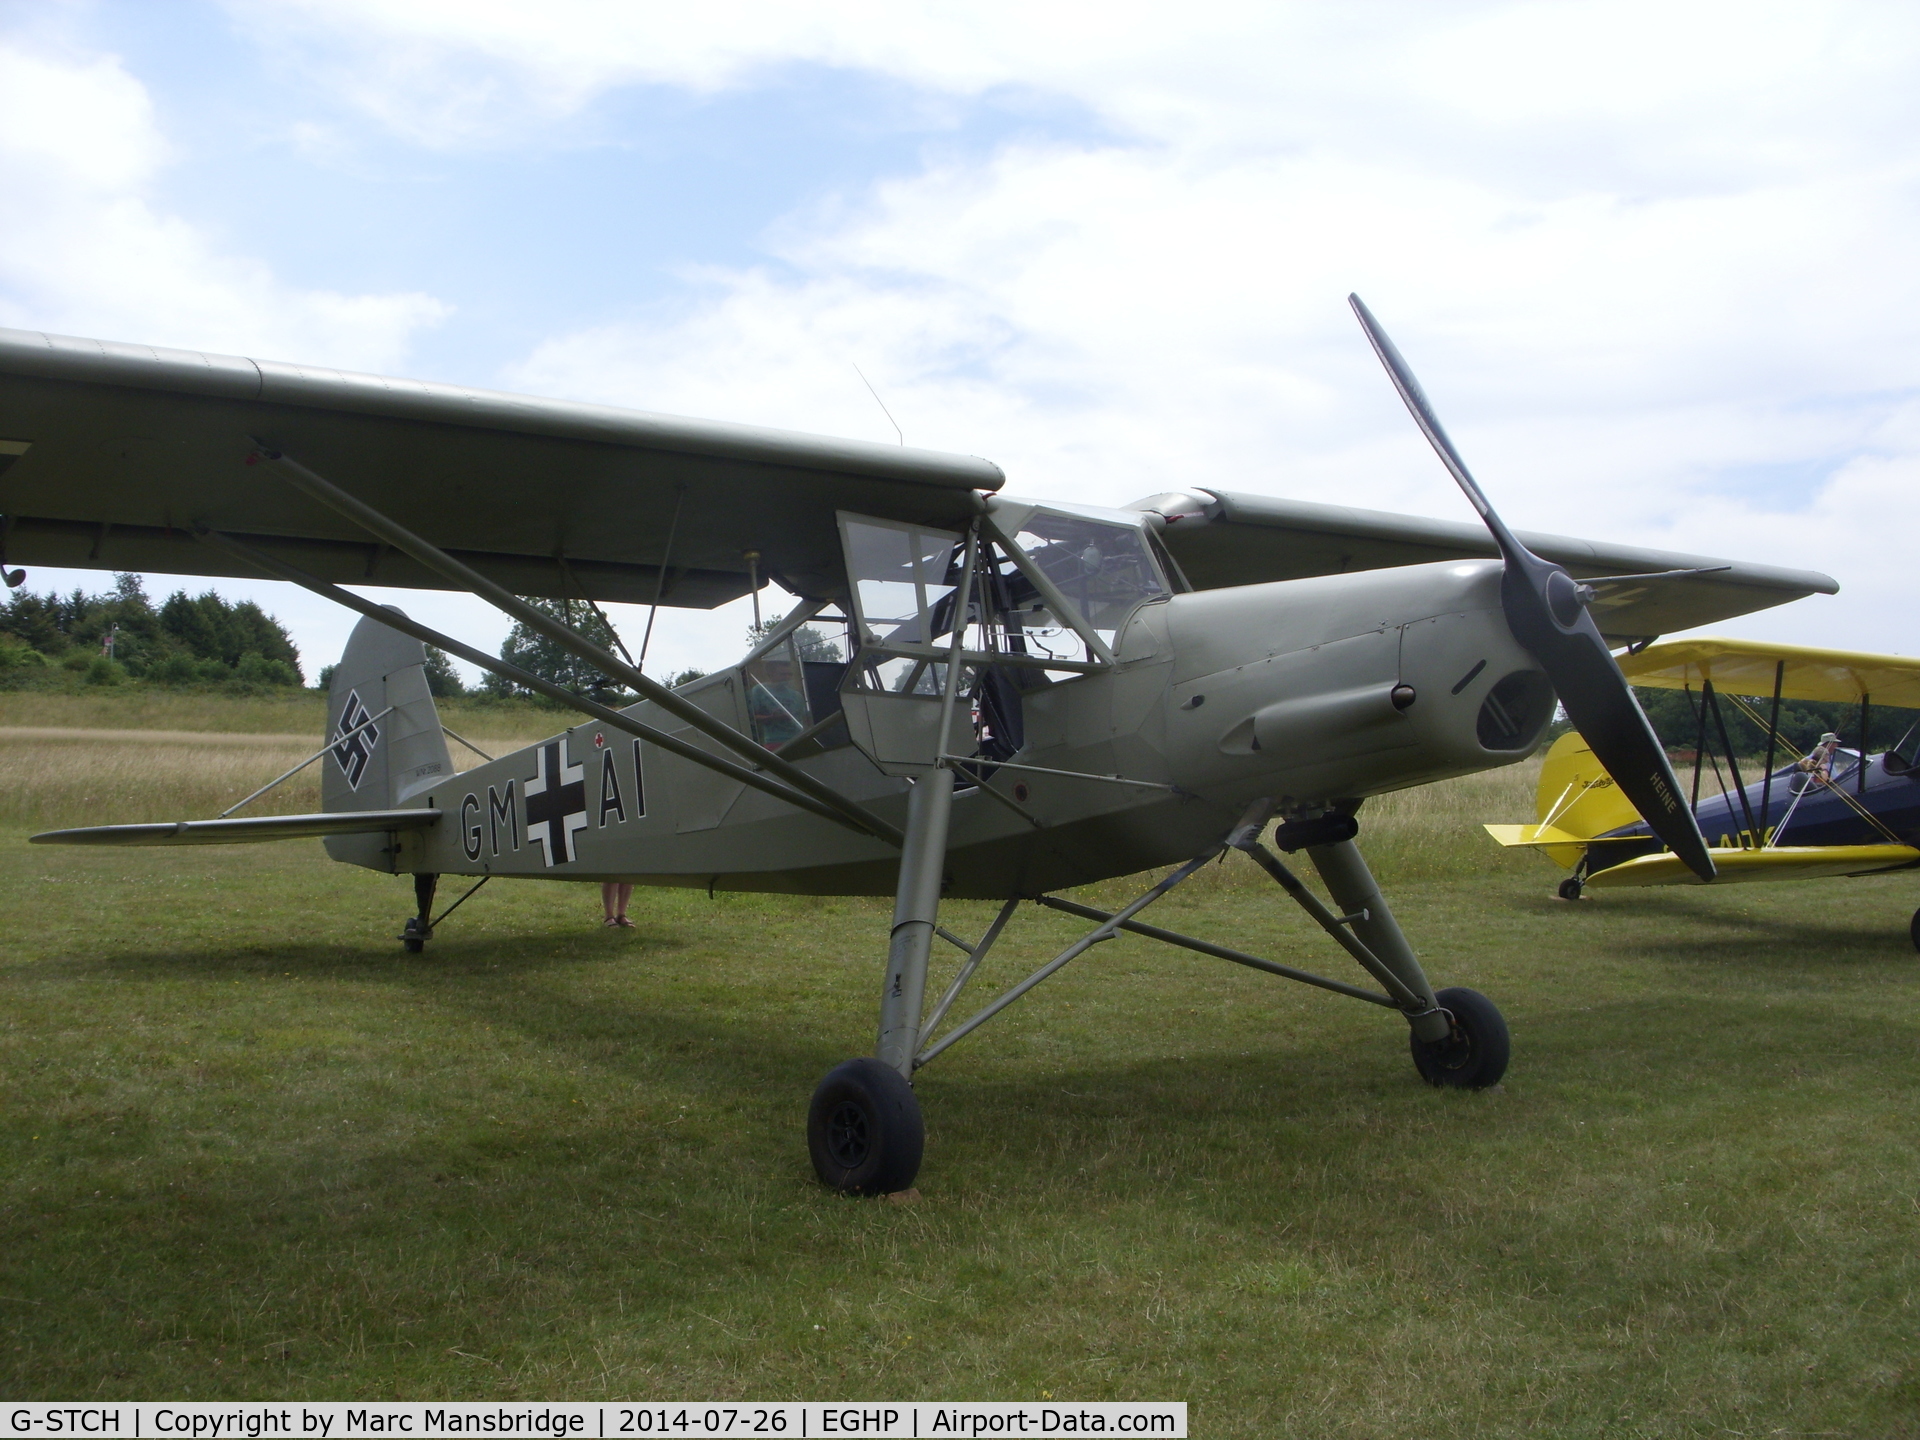 G-STCH, 1942 Fieseler Fi-156A-1 Storch C/N 2088, A welcome visitor into Popham airfield EGHP